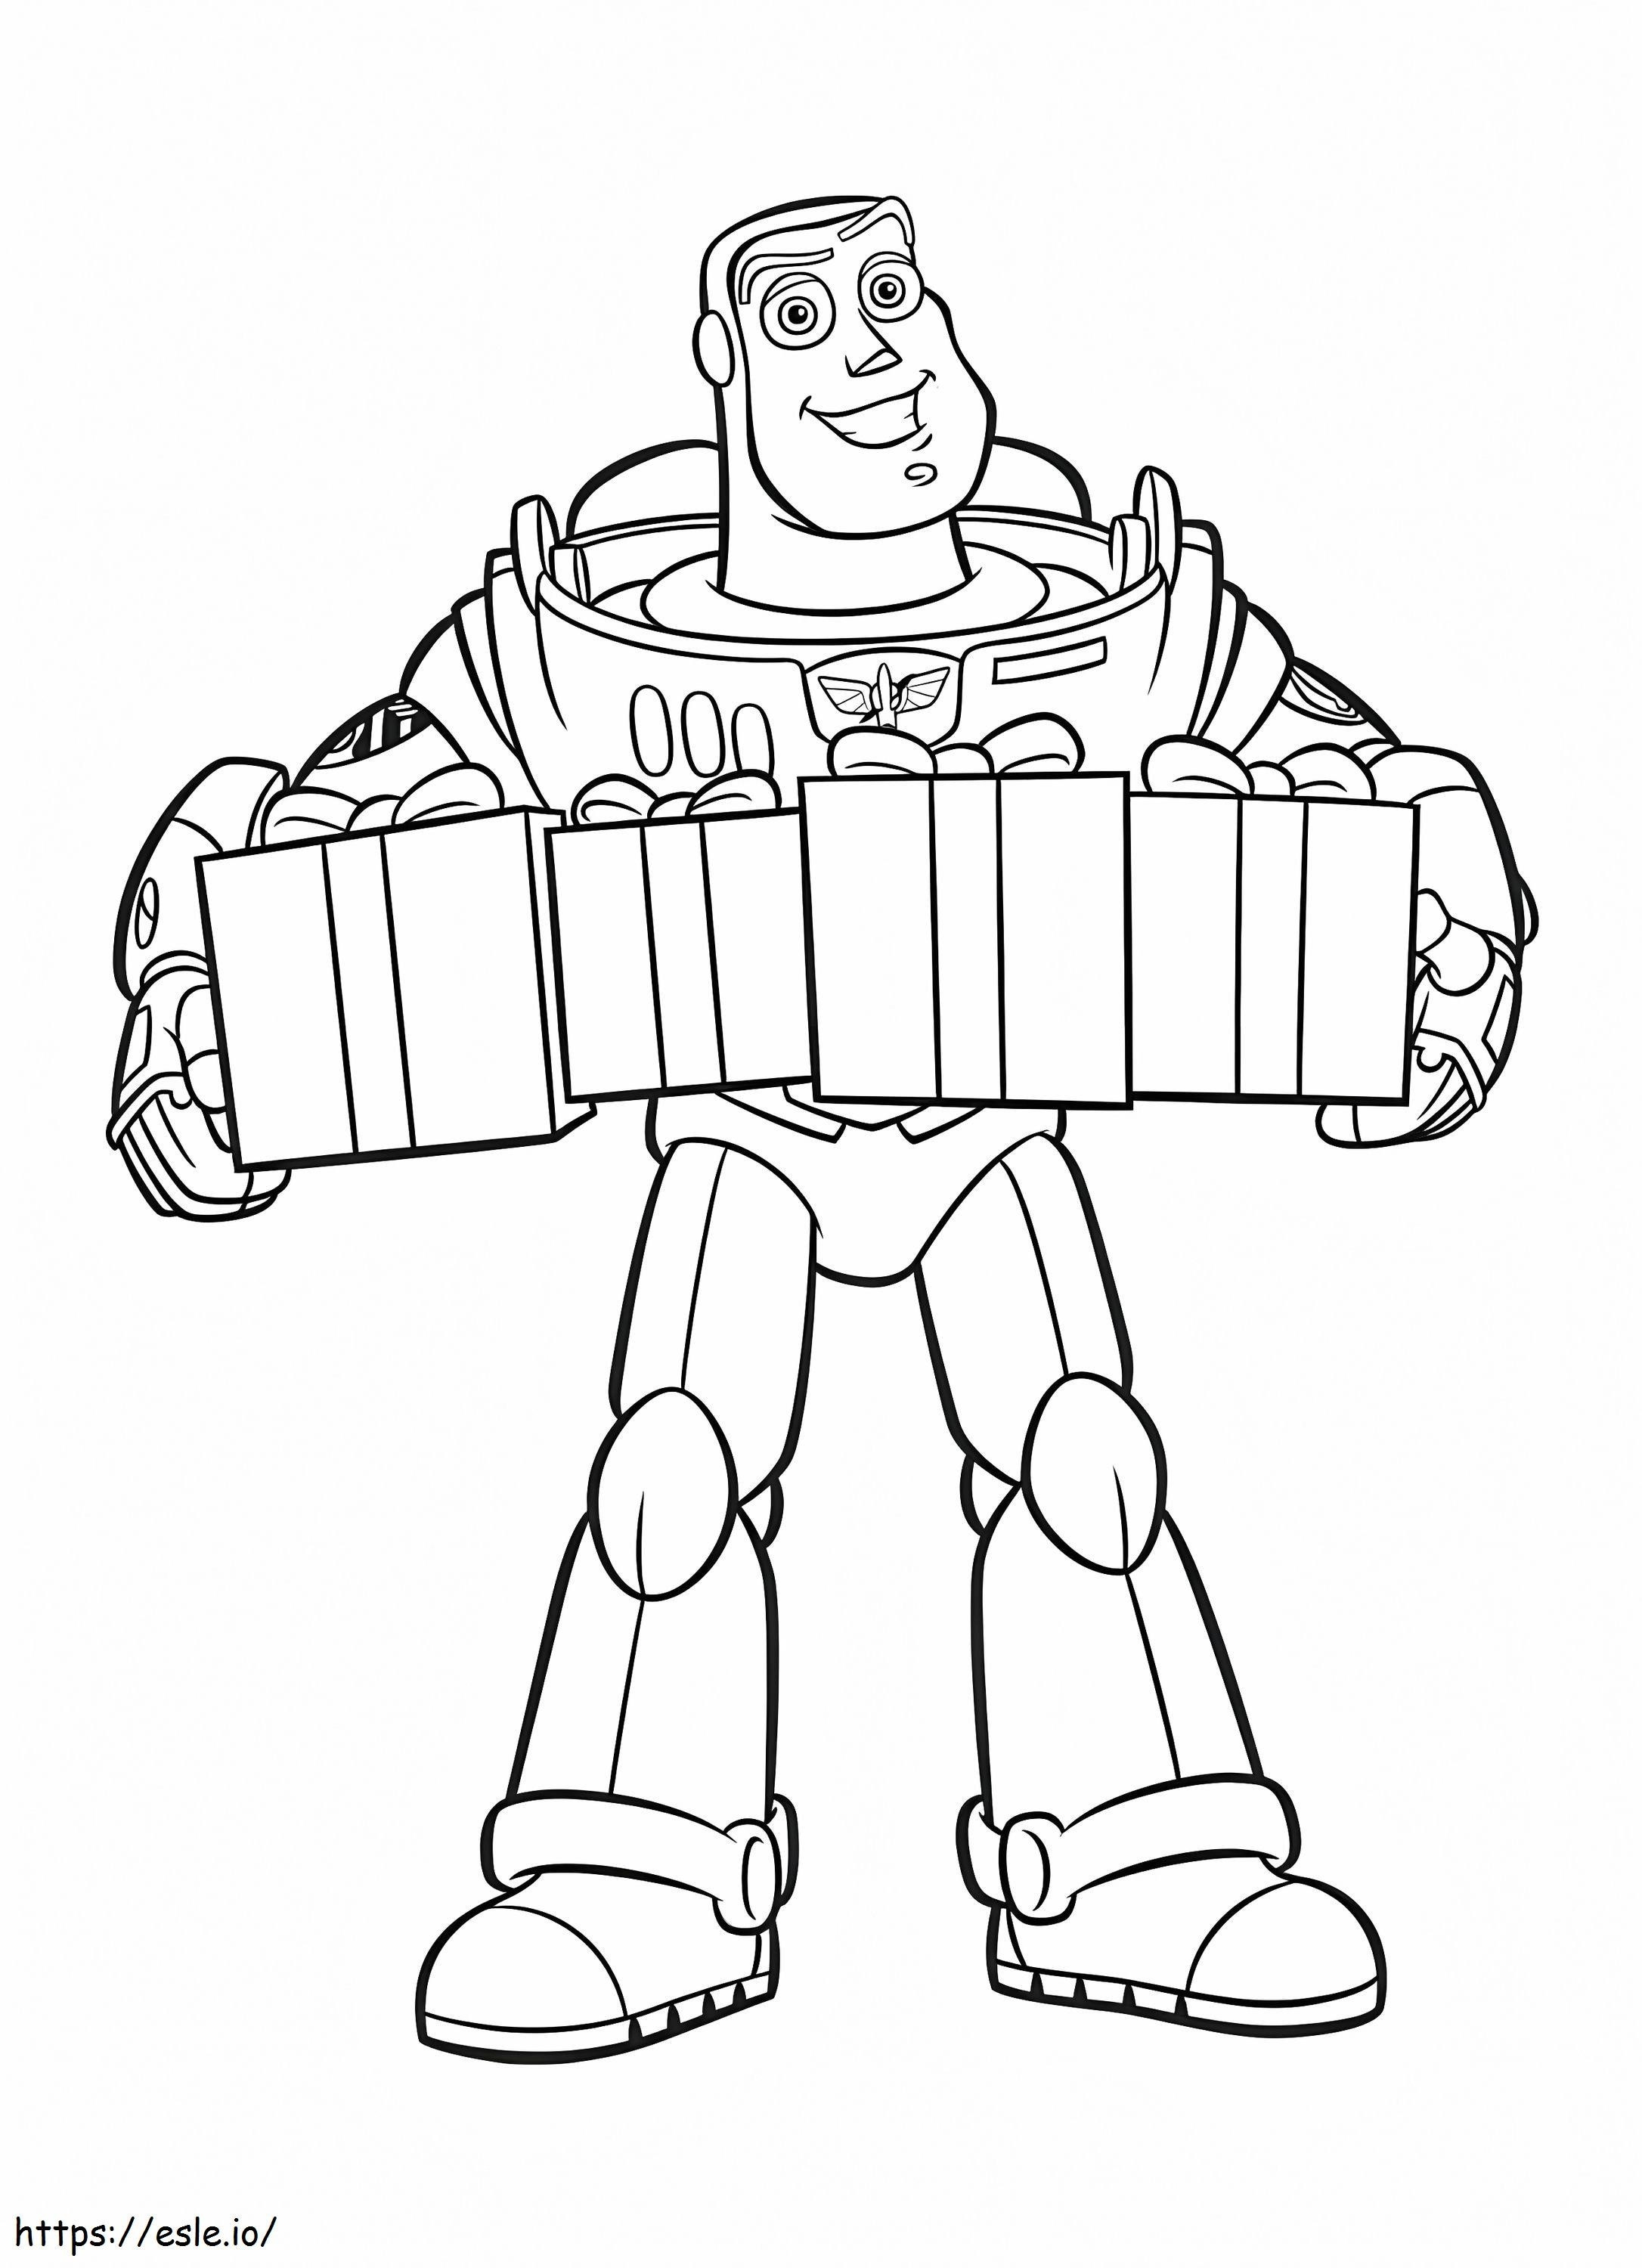 Buzz Lightyear With Presents coloring page